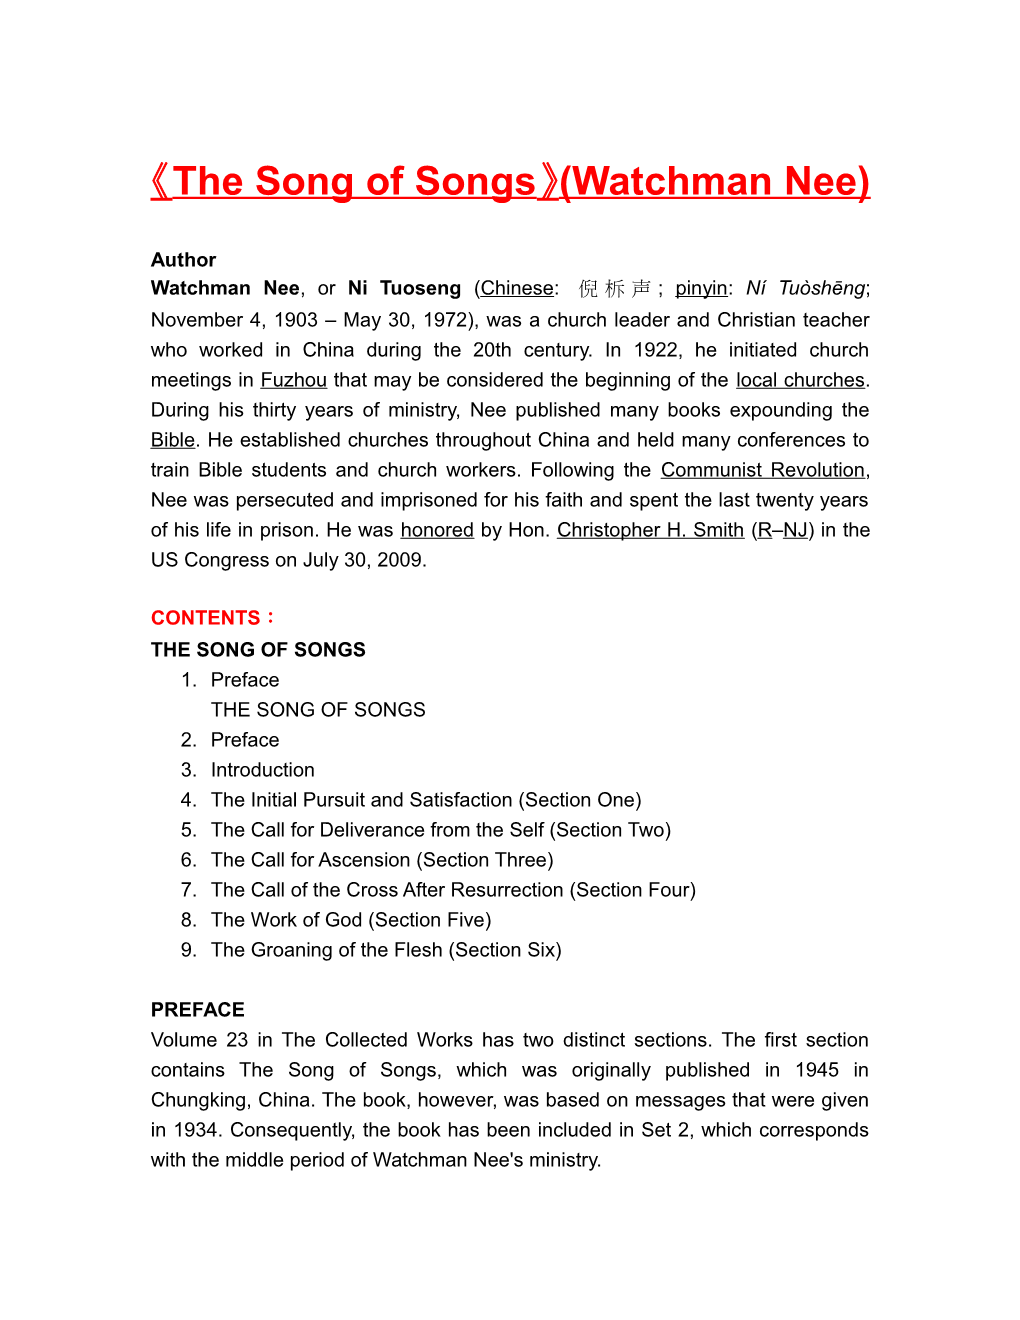 The Song of Songs (Watchman Nee)